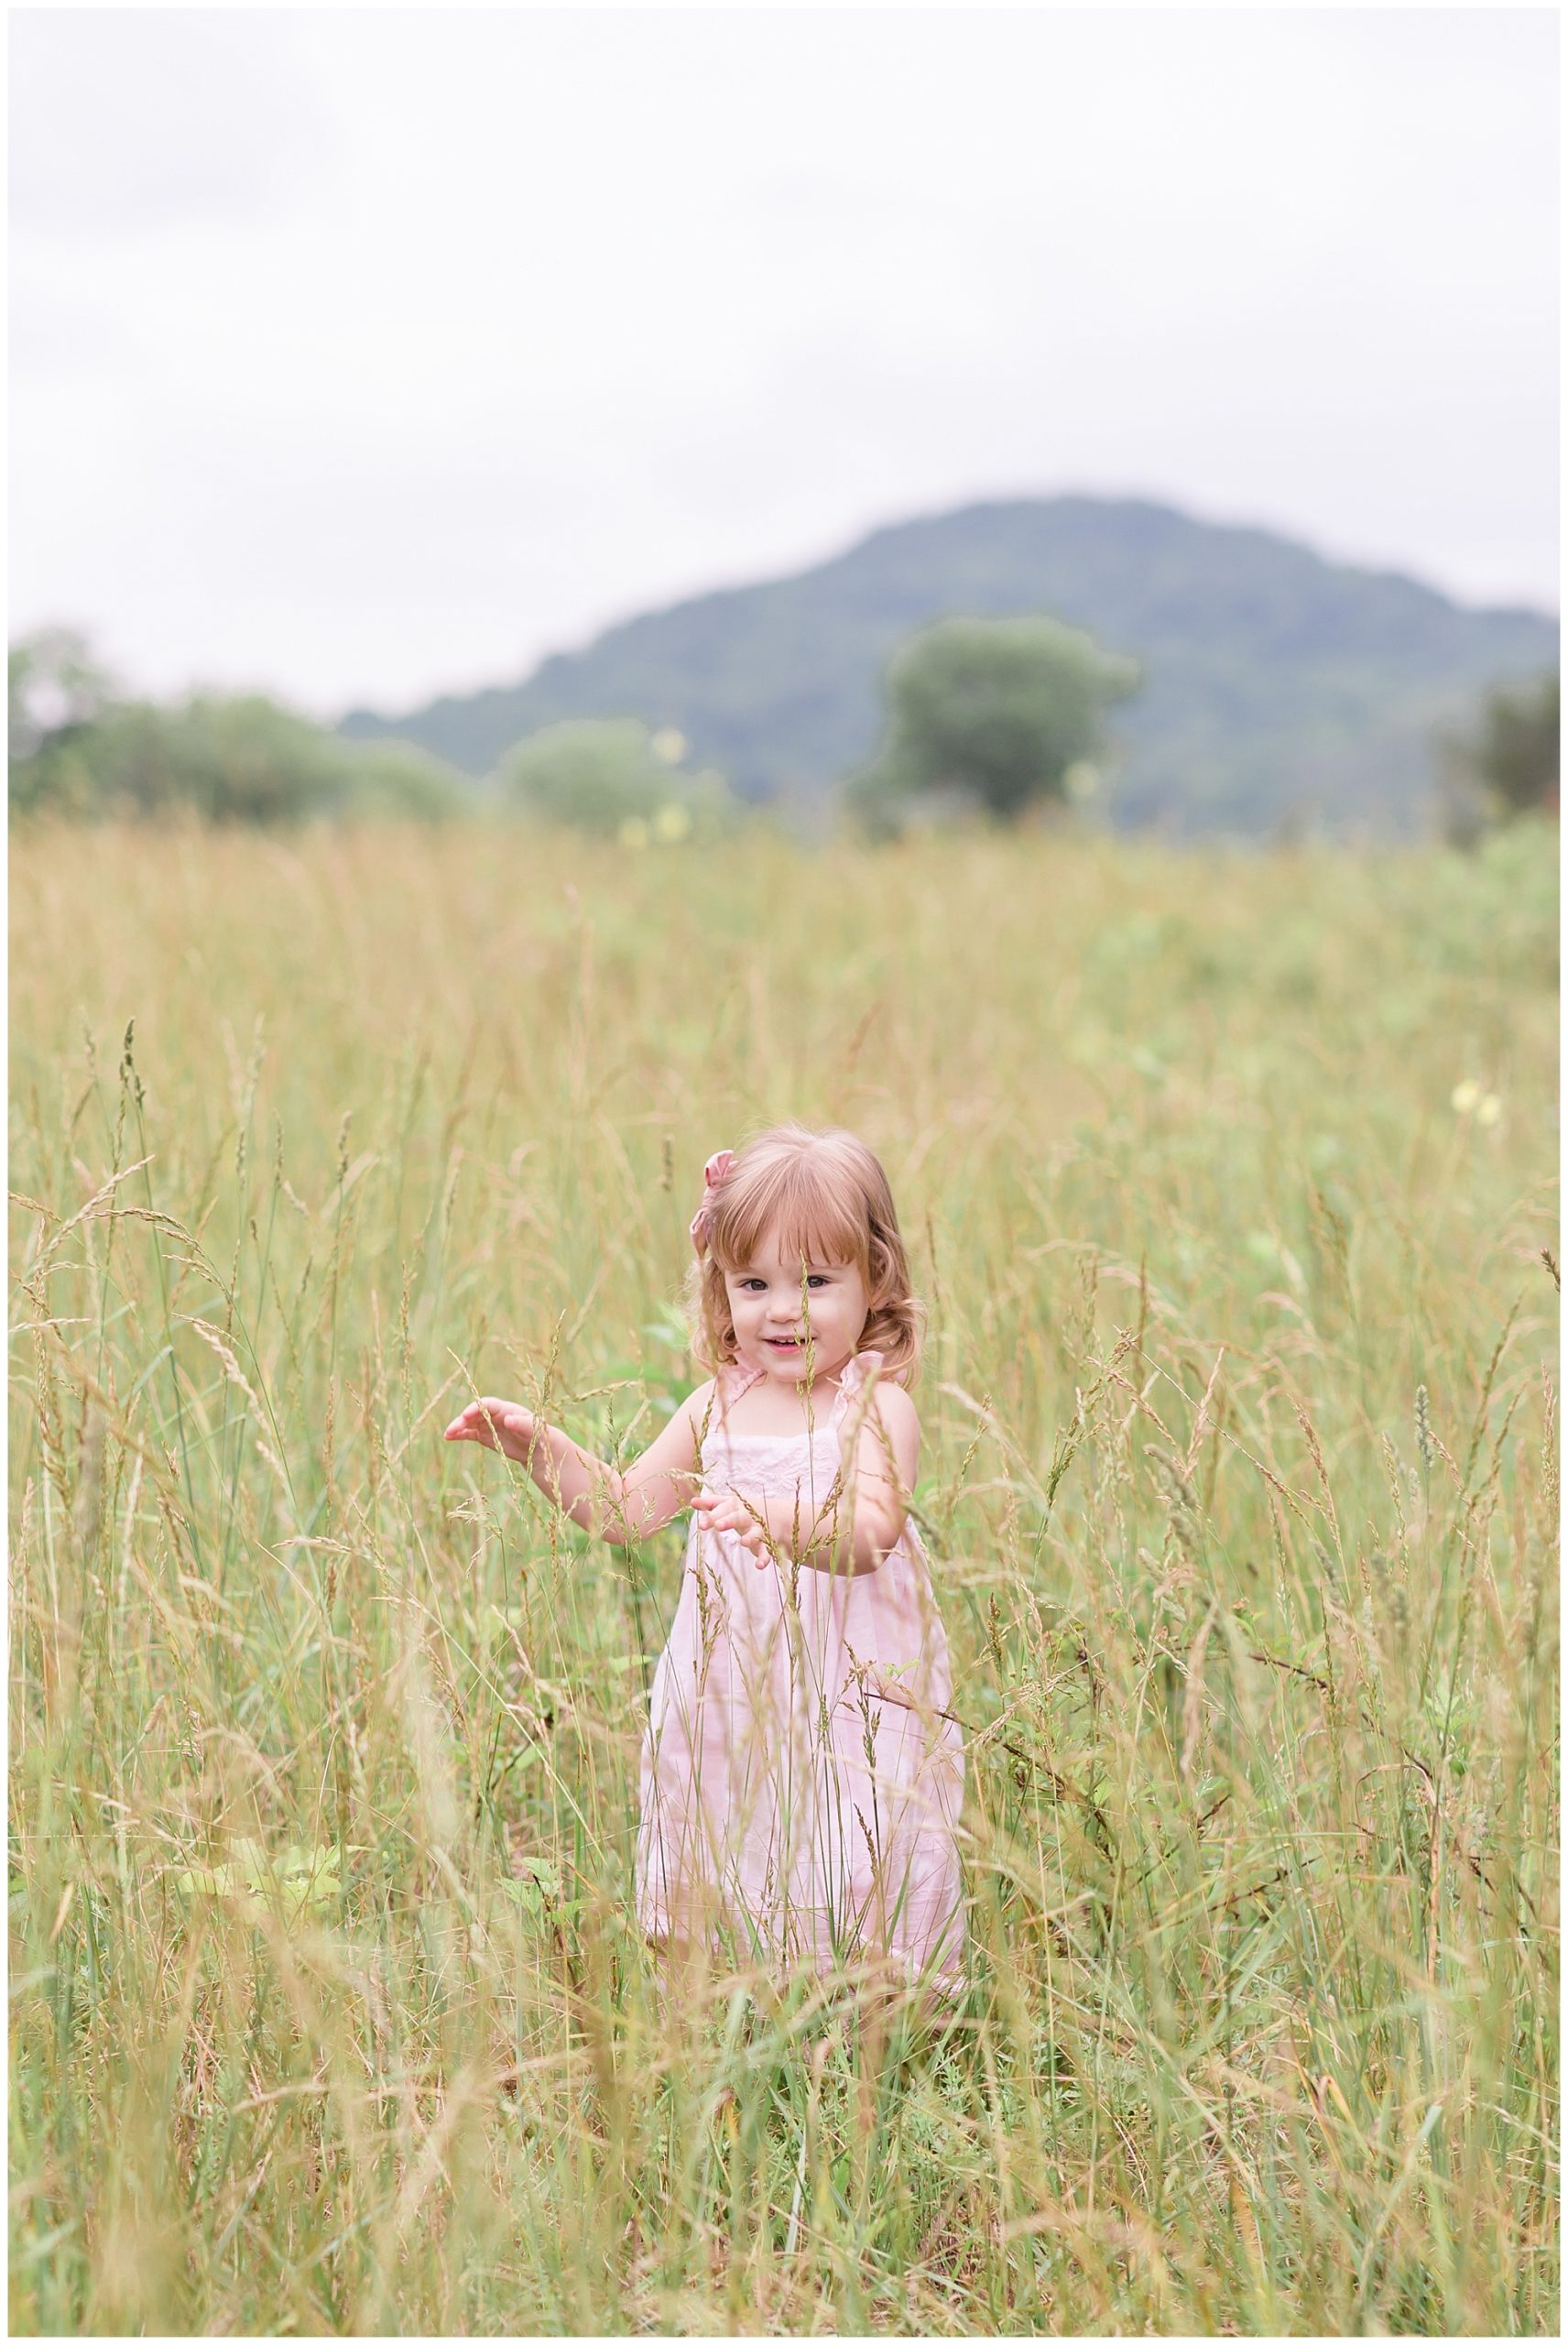 This adorable little girl is seen here playing in a beautiful field. She is wearing a sleeveless light pink dress and a matching pink hair bow.